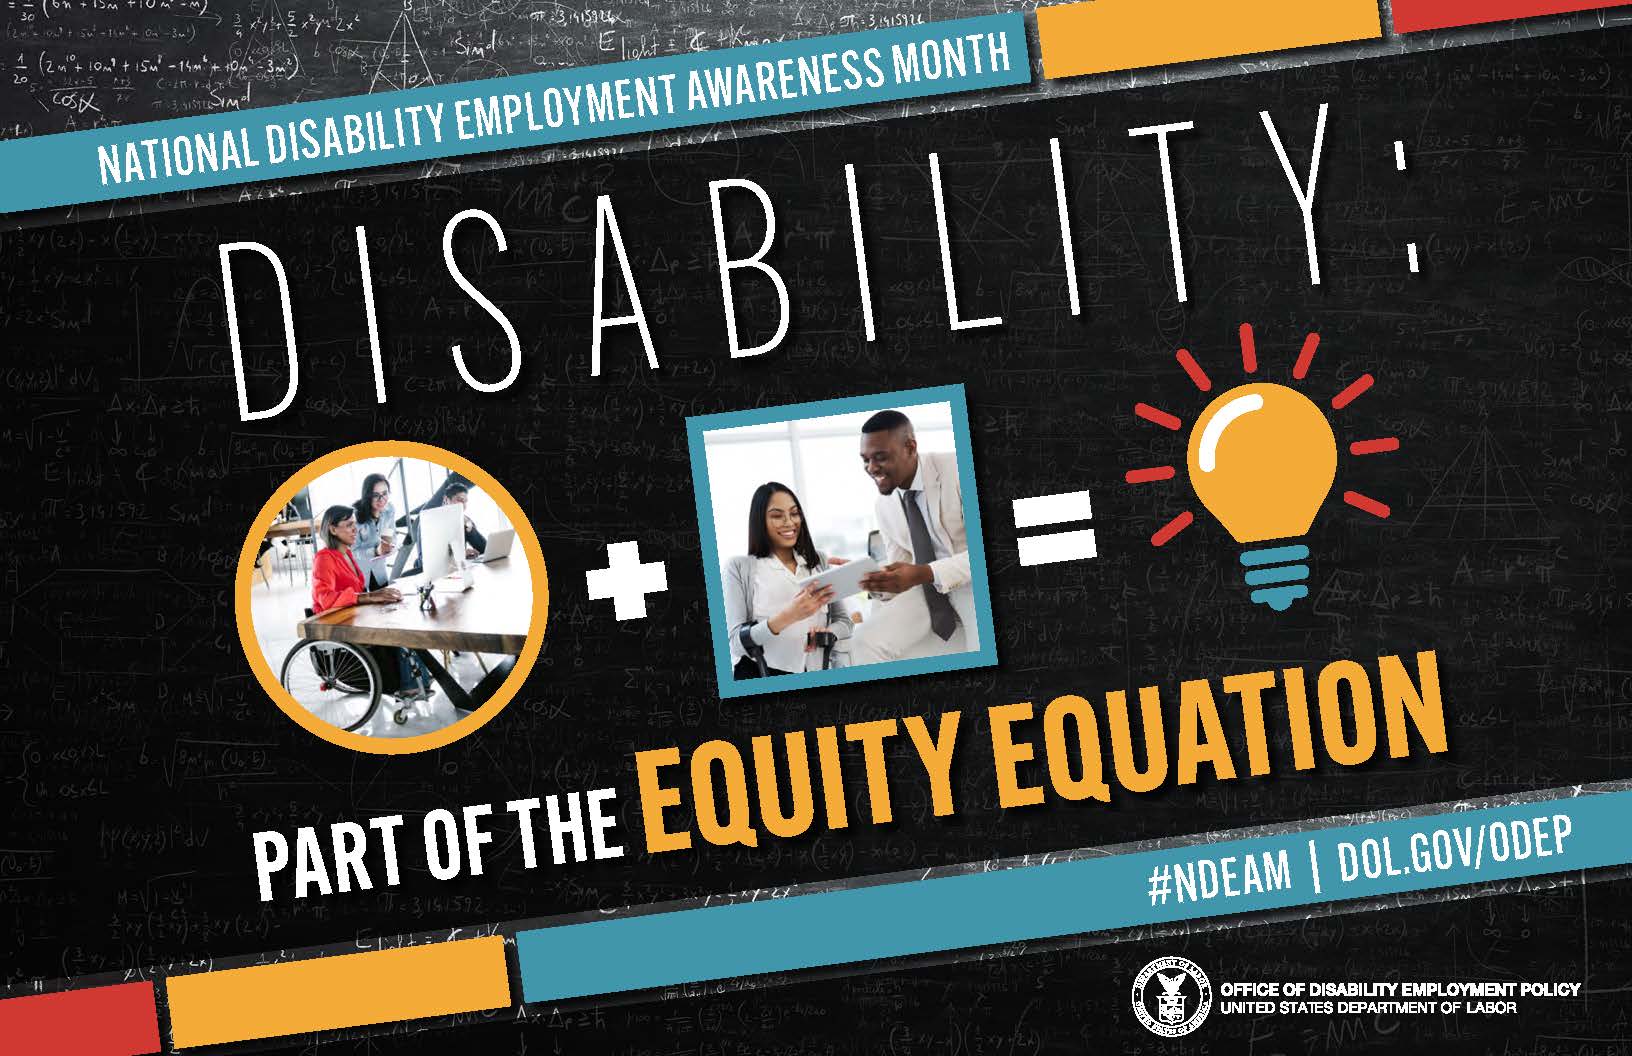 National Disability Employment Awareness Month (NDEAM) poster which  is rectangular in shape with a black colored chalkboard background overlaid with mathematical equations. In the center of the poster, on a diagonal, is a black rectangle bordered by small teal, yellow and red rectangles. It features the 2022 NDEAM theme, “Disability: Part of the Equity Equation,” along with an equation composed of several graphics: a circular photo of a woman in a wheelchair working at a computer with colleagues, followed by a plus sign, followed by a square image of a woman who uses crutches viewing a document with a colleague, followed by an equal sign, followed by a light bulb icon. Across the top of the rectangle in small, white letters are the words National Disability Employment Awareness Month. Along the bottom in small white letters is the hashtag “NDEAM” followed by ODEP’s website address, dol.gov/ODEP. In the lower right corner in white lettering is the DOL seal followed by the words “Office of Disability Employment Policy United States Department of Labor.”